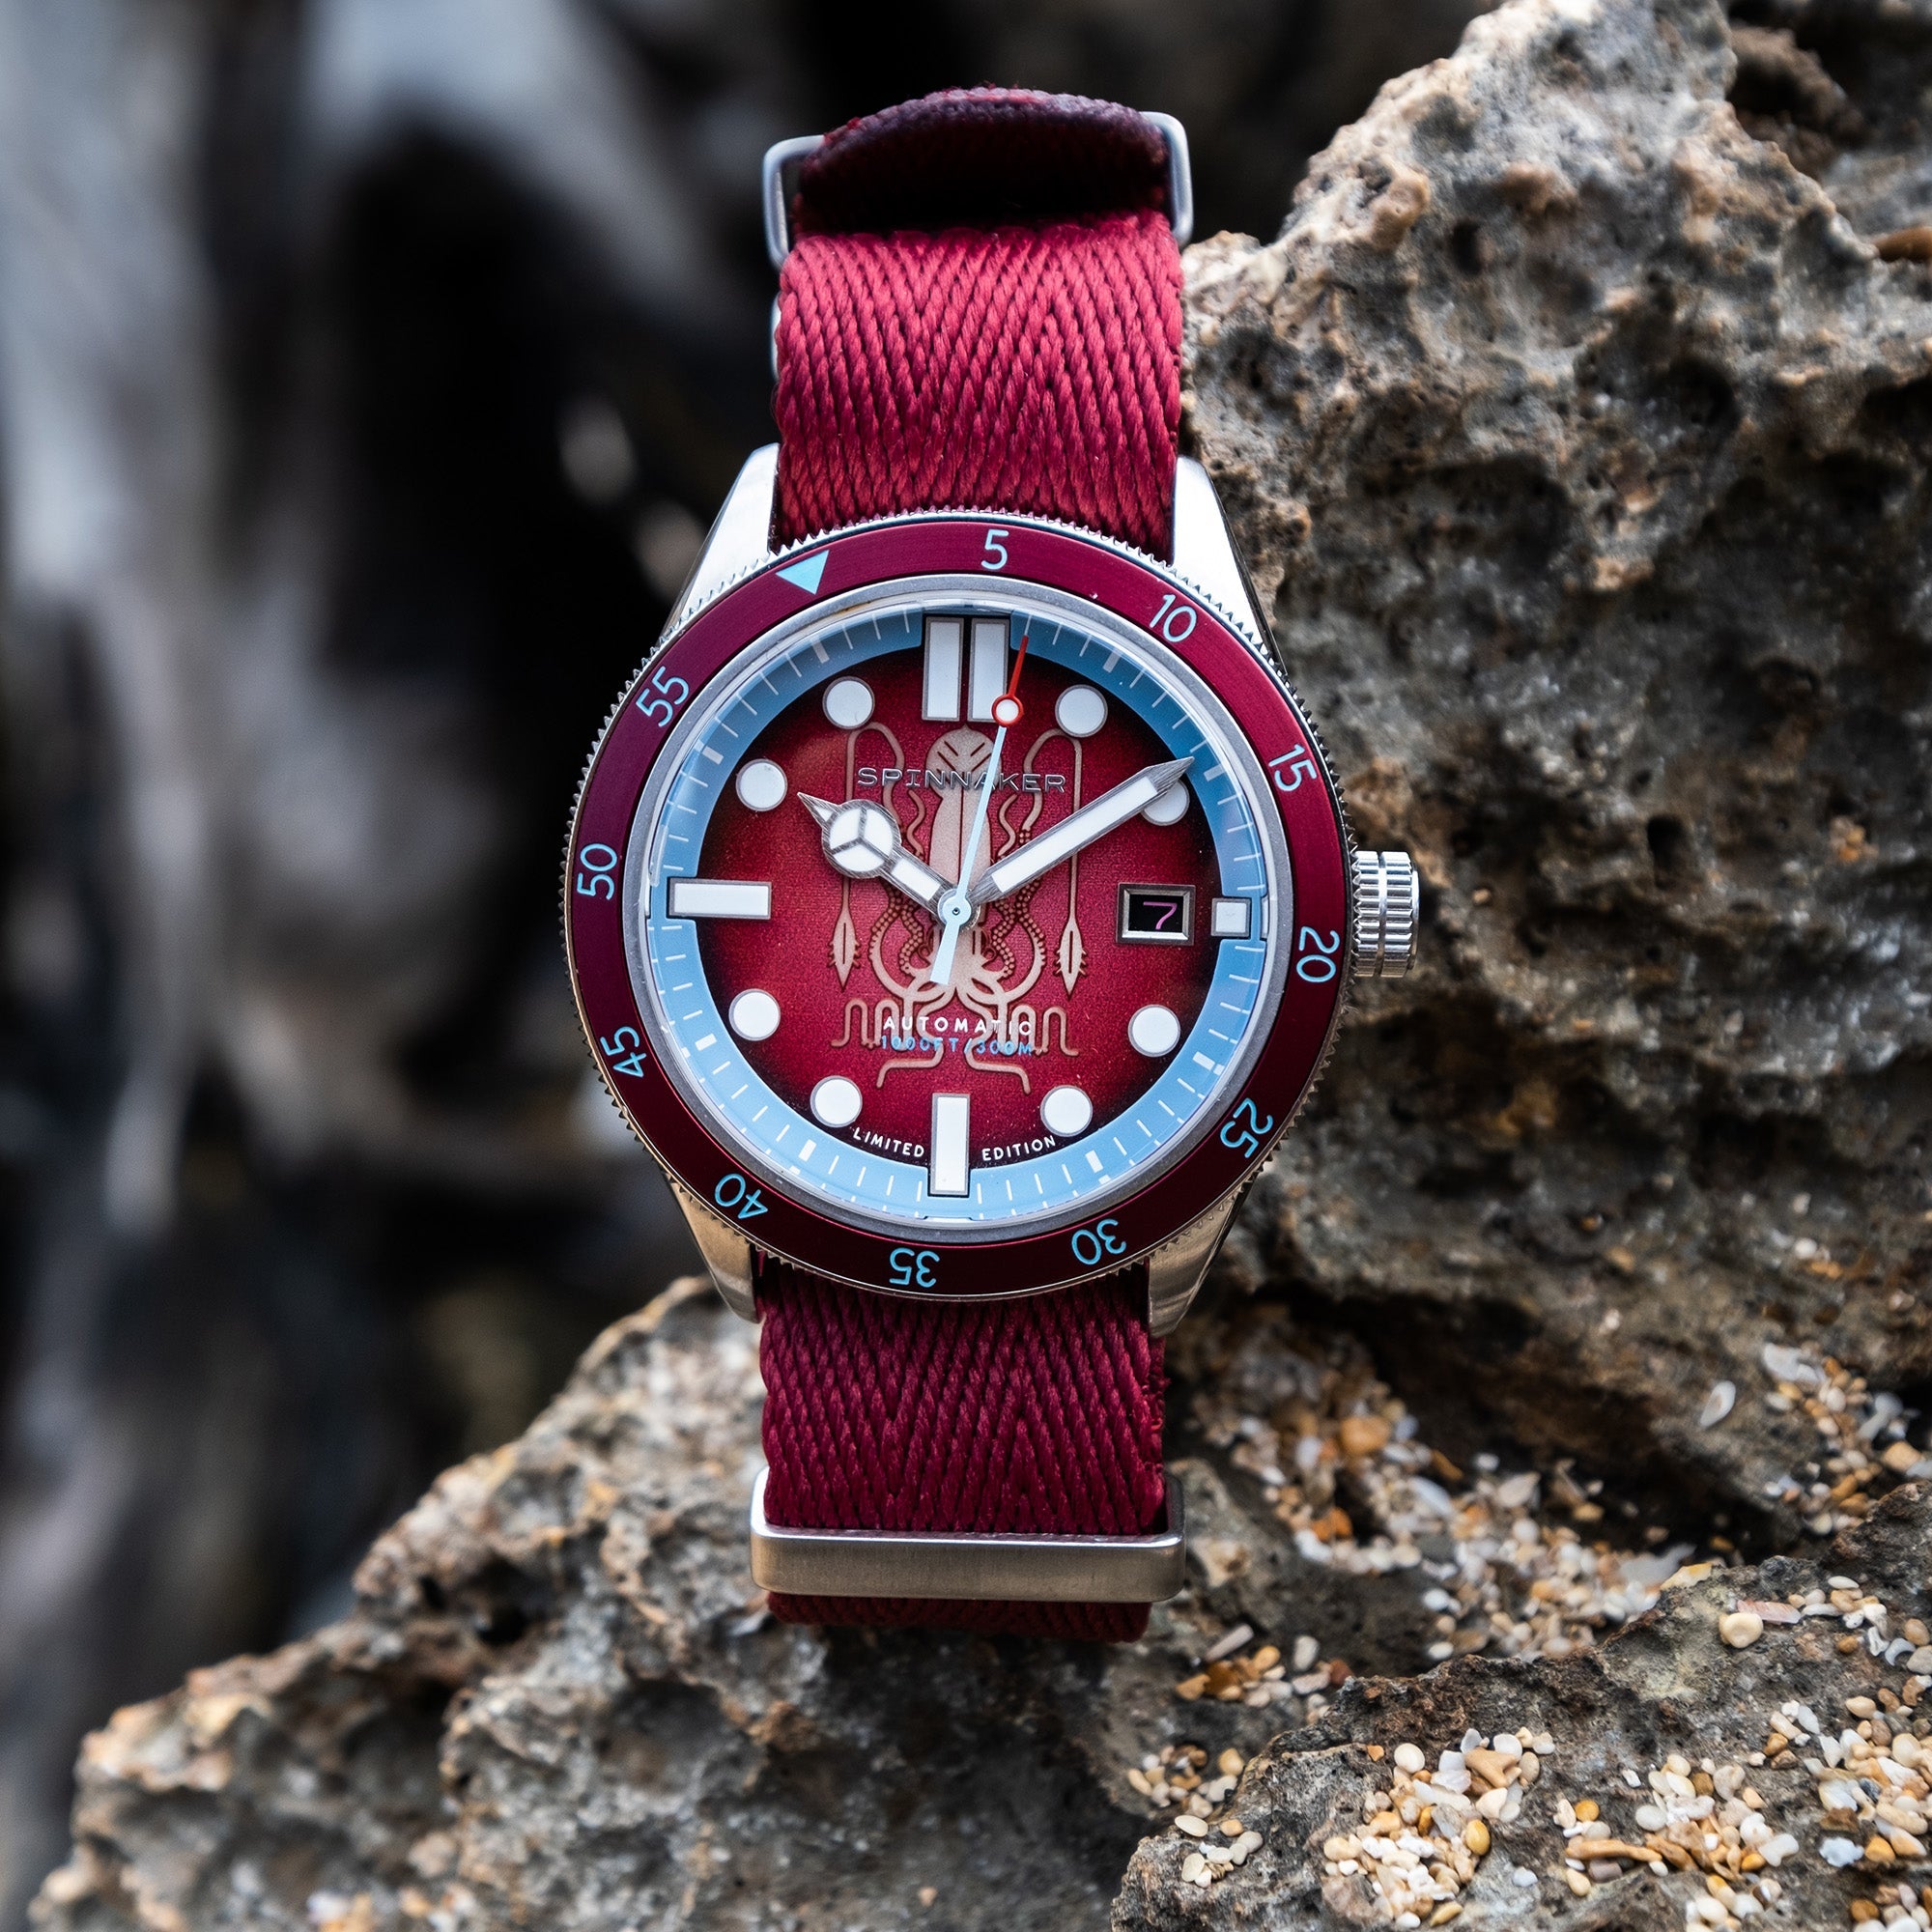 SPINNAKER Spinnaker Cahill 300 Automatic Marine Conservation Society Limited Edition Calamari Red Men's Watch SP-5125-11